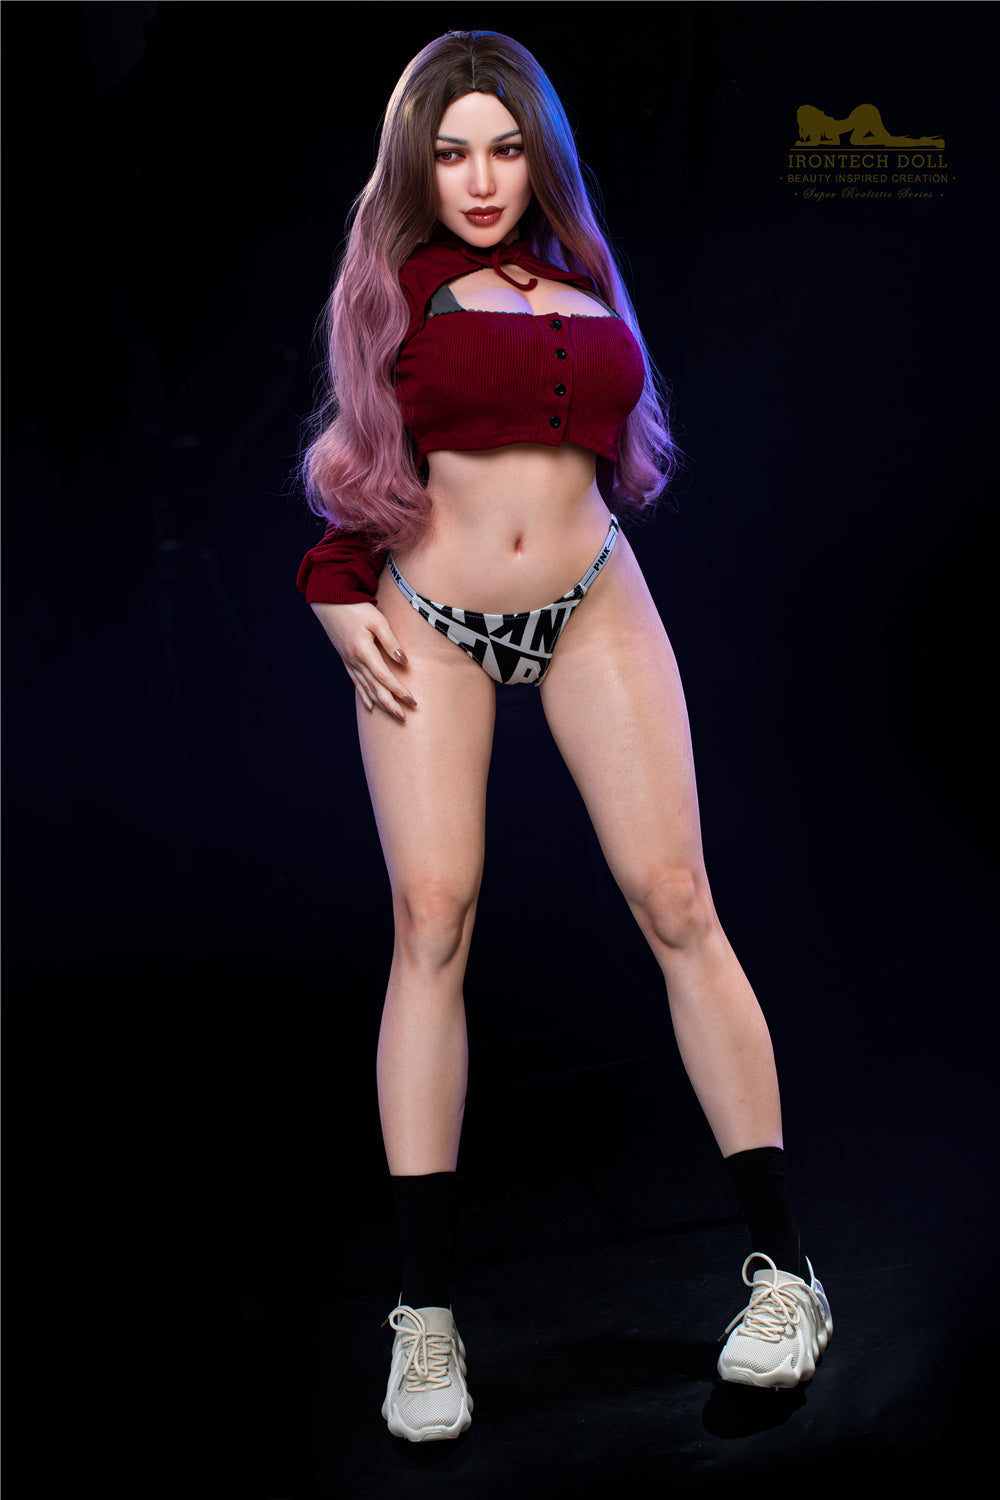 Irontech Doll 165 cm Silicone - Reyna | Buy Sex Dolls at DOLLS ACTUALLY